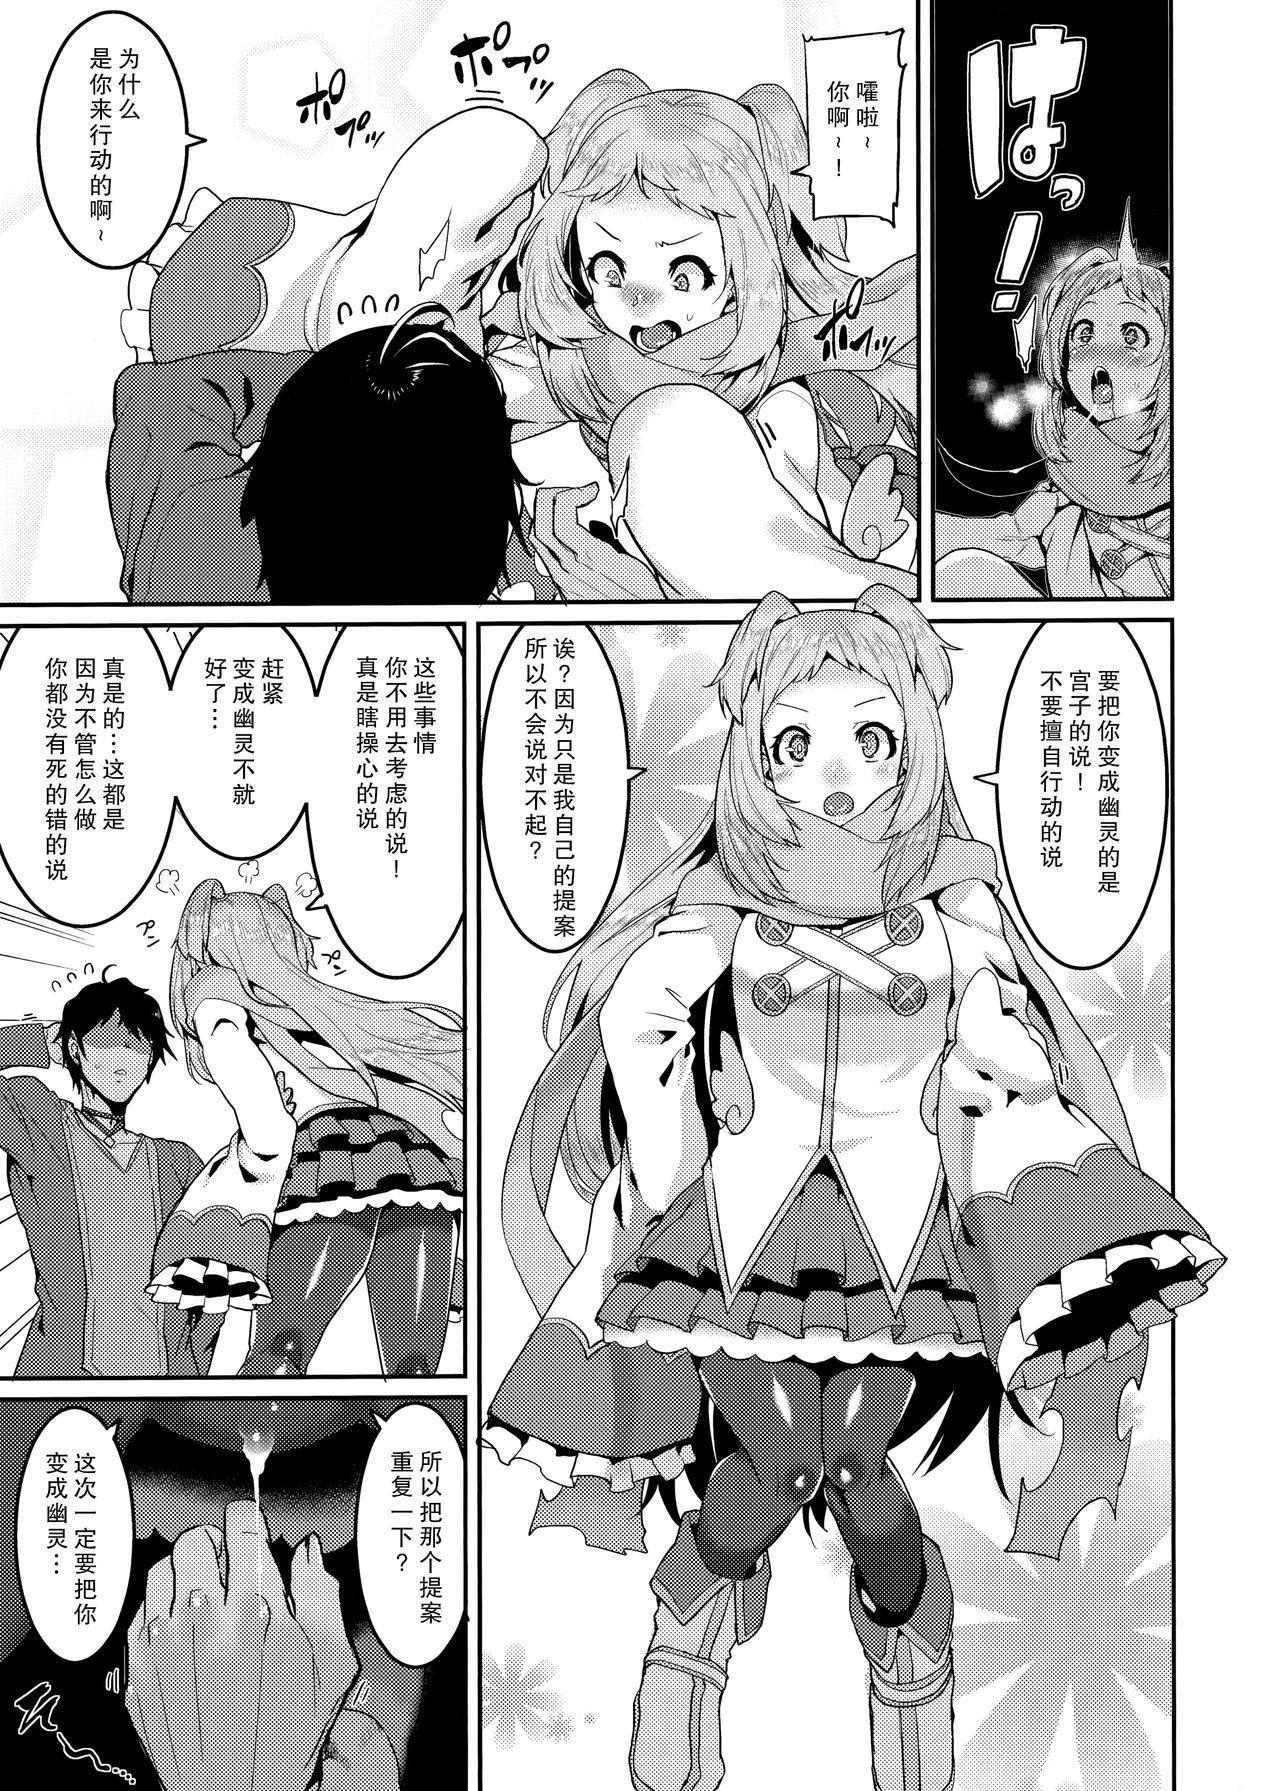 Glory Hole (C96) [HBO (Henkuma)] Pudding Switch (Princess Connect! Re:Dive) [Chinese] 【零食汉化组】 - Princess connect Que - Page 8